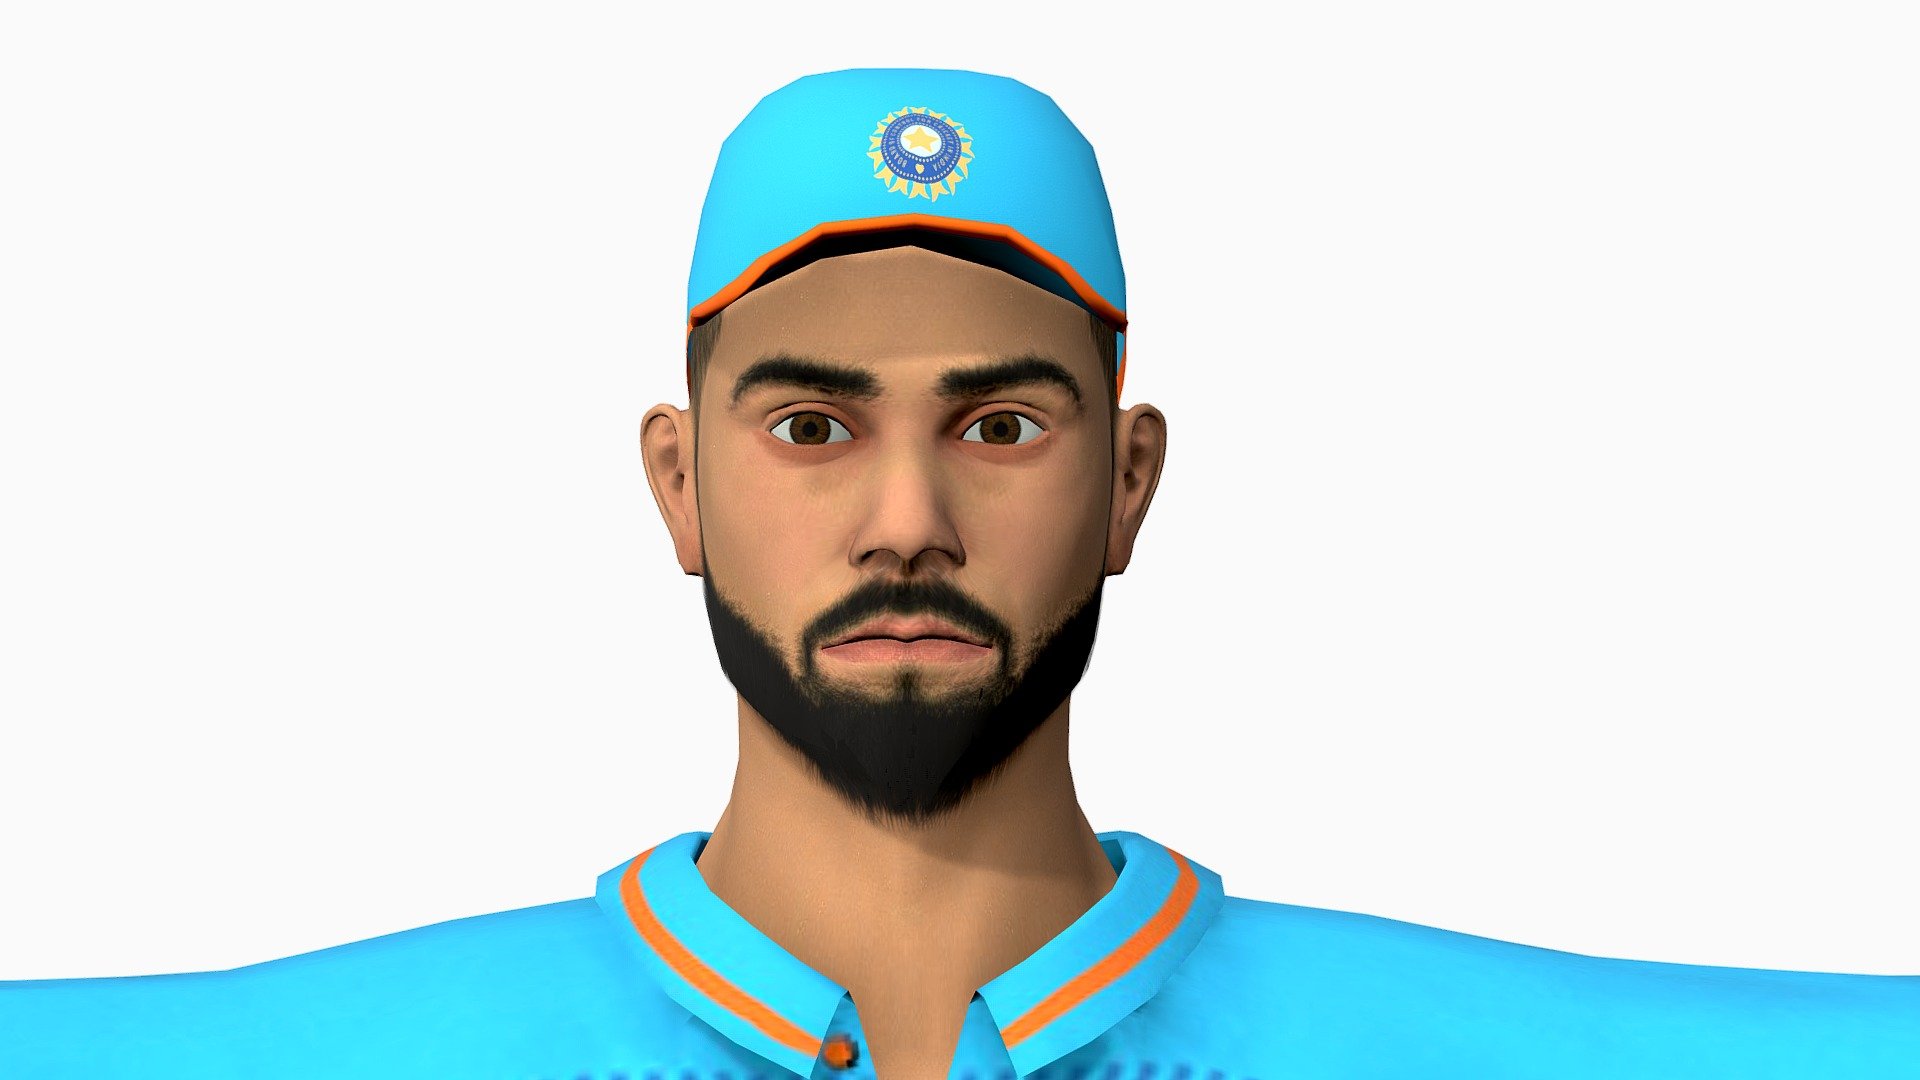 Virat kohli low poly model for AR/VR application and games. Created with the help of 3ds max, photoshop, substance painter, zbrush, B2M 3d model